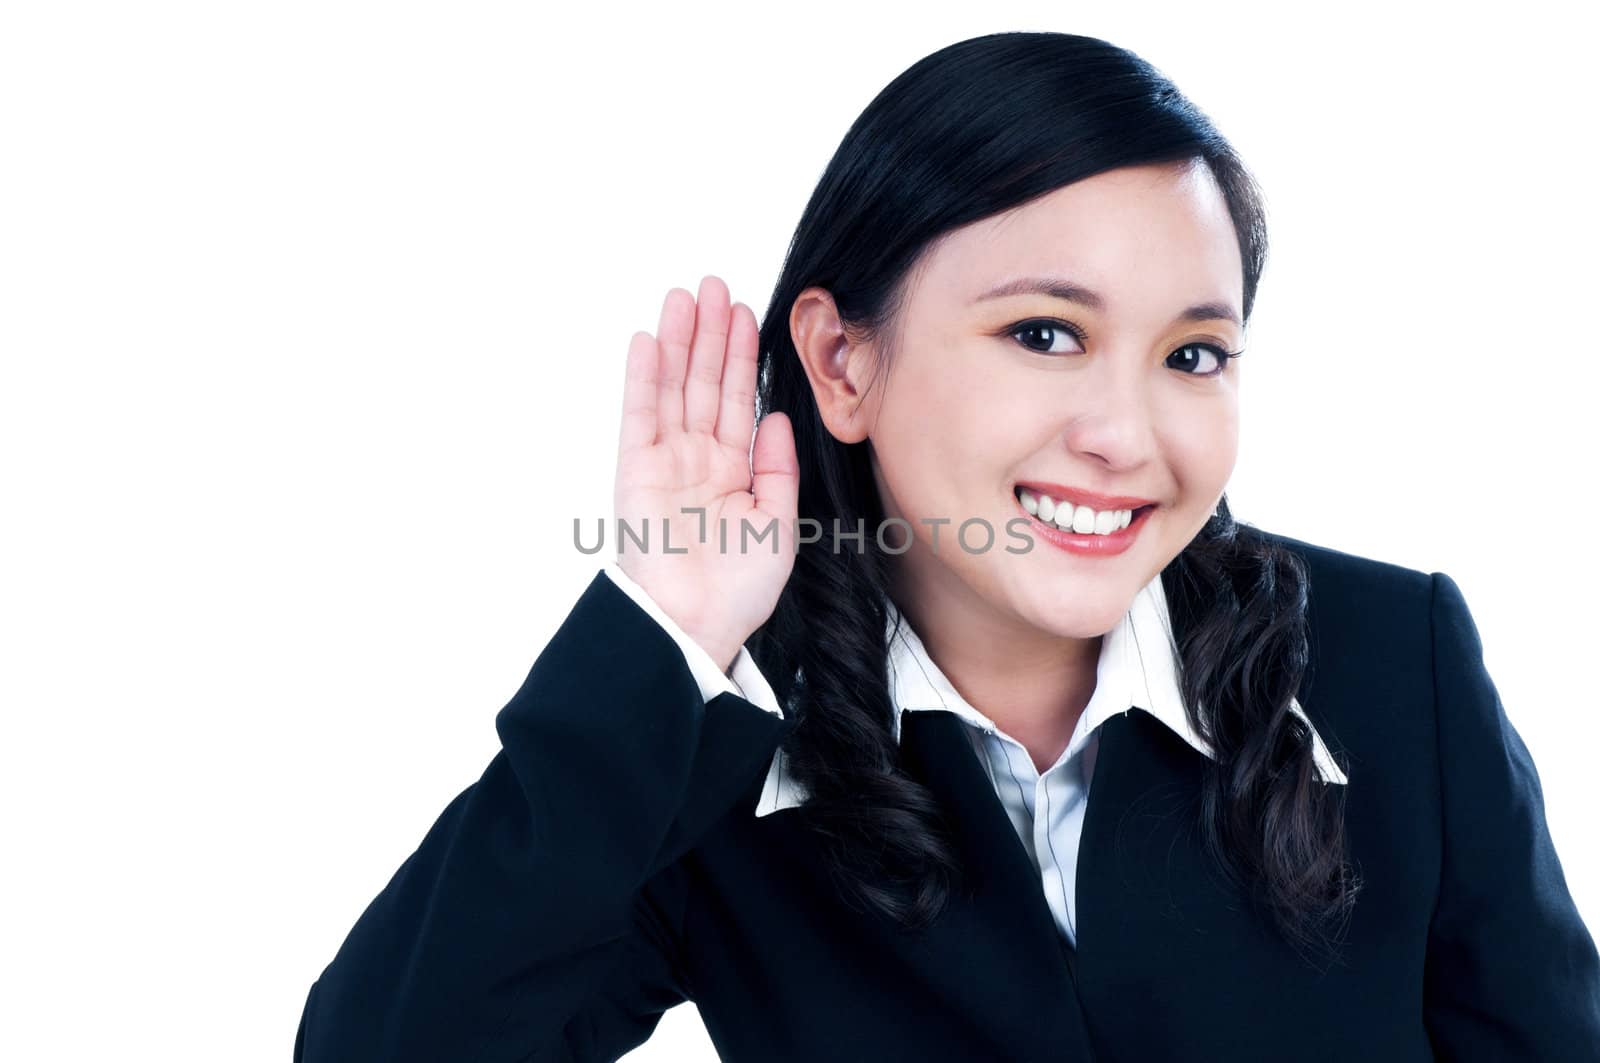 Portrait of a beautiful businesswoman putting her hand over ear, isolated on white.